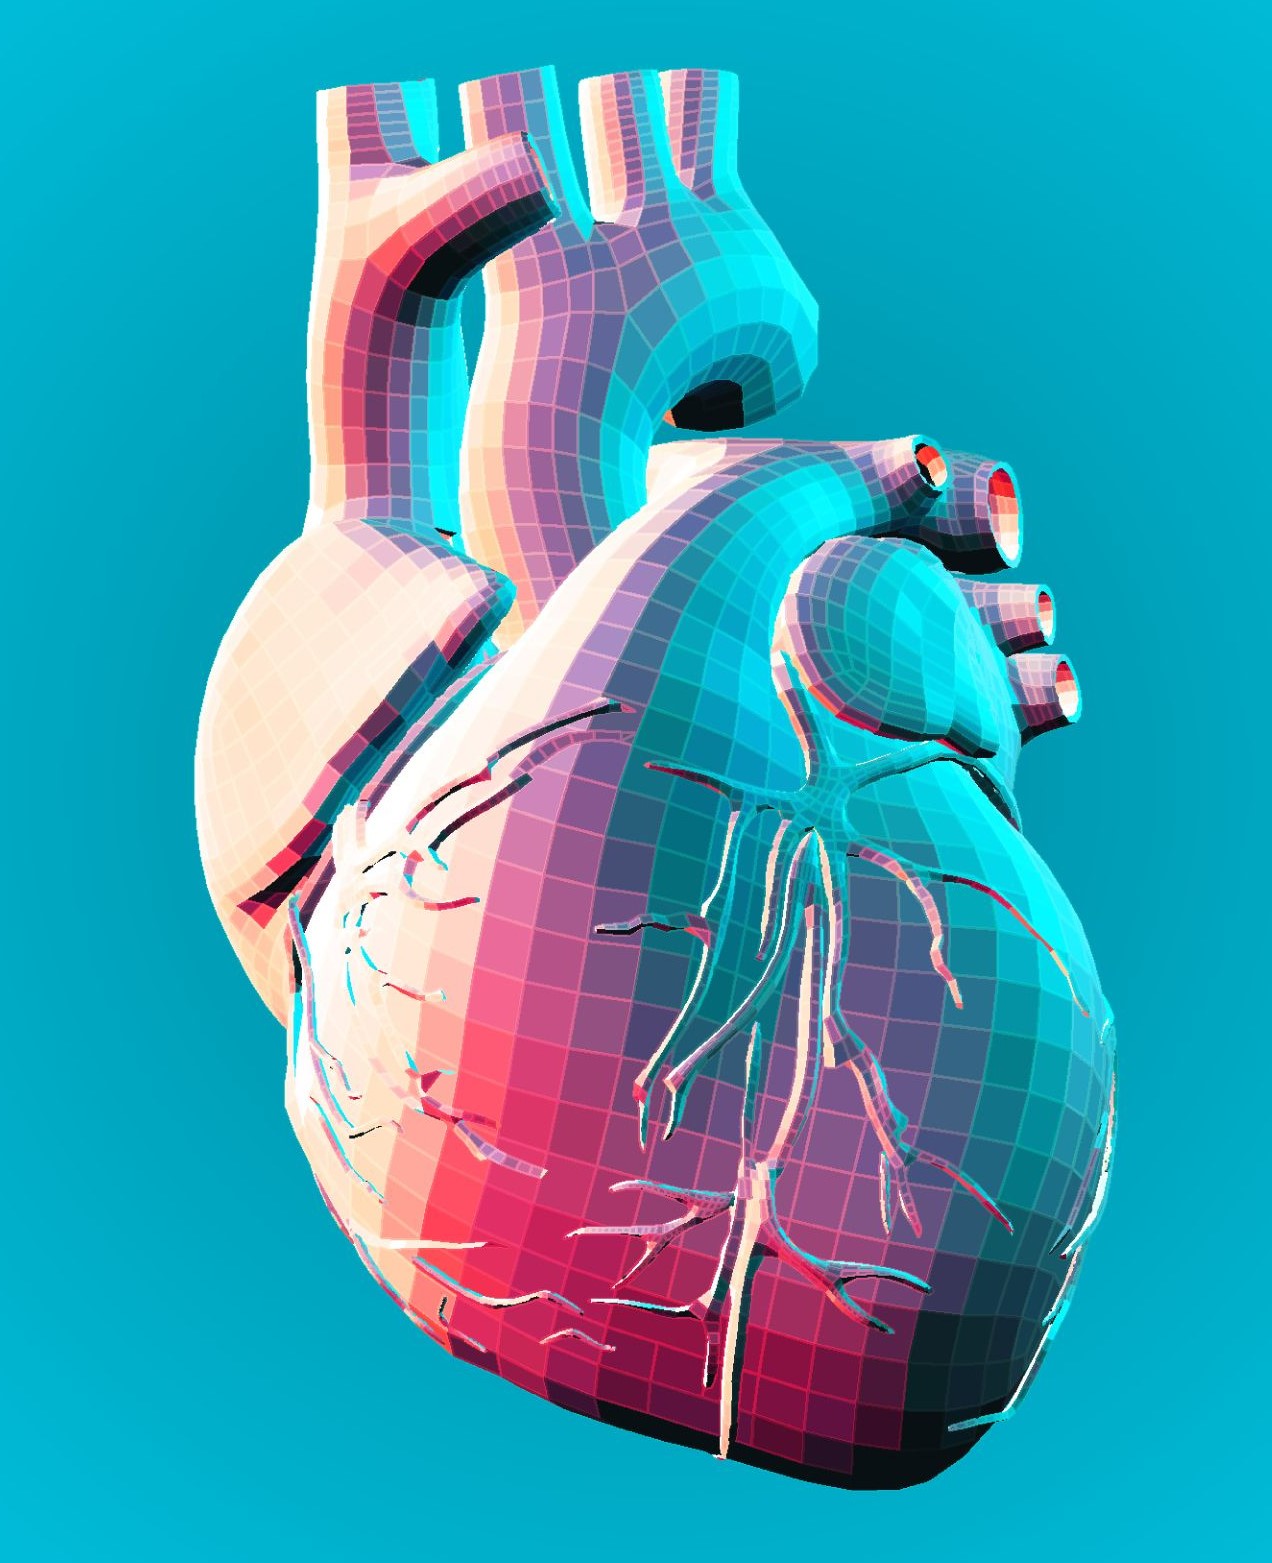 The Heart Image